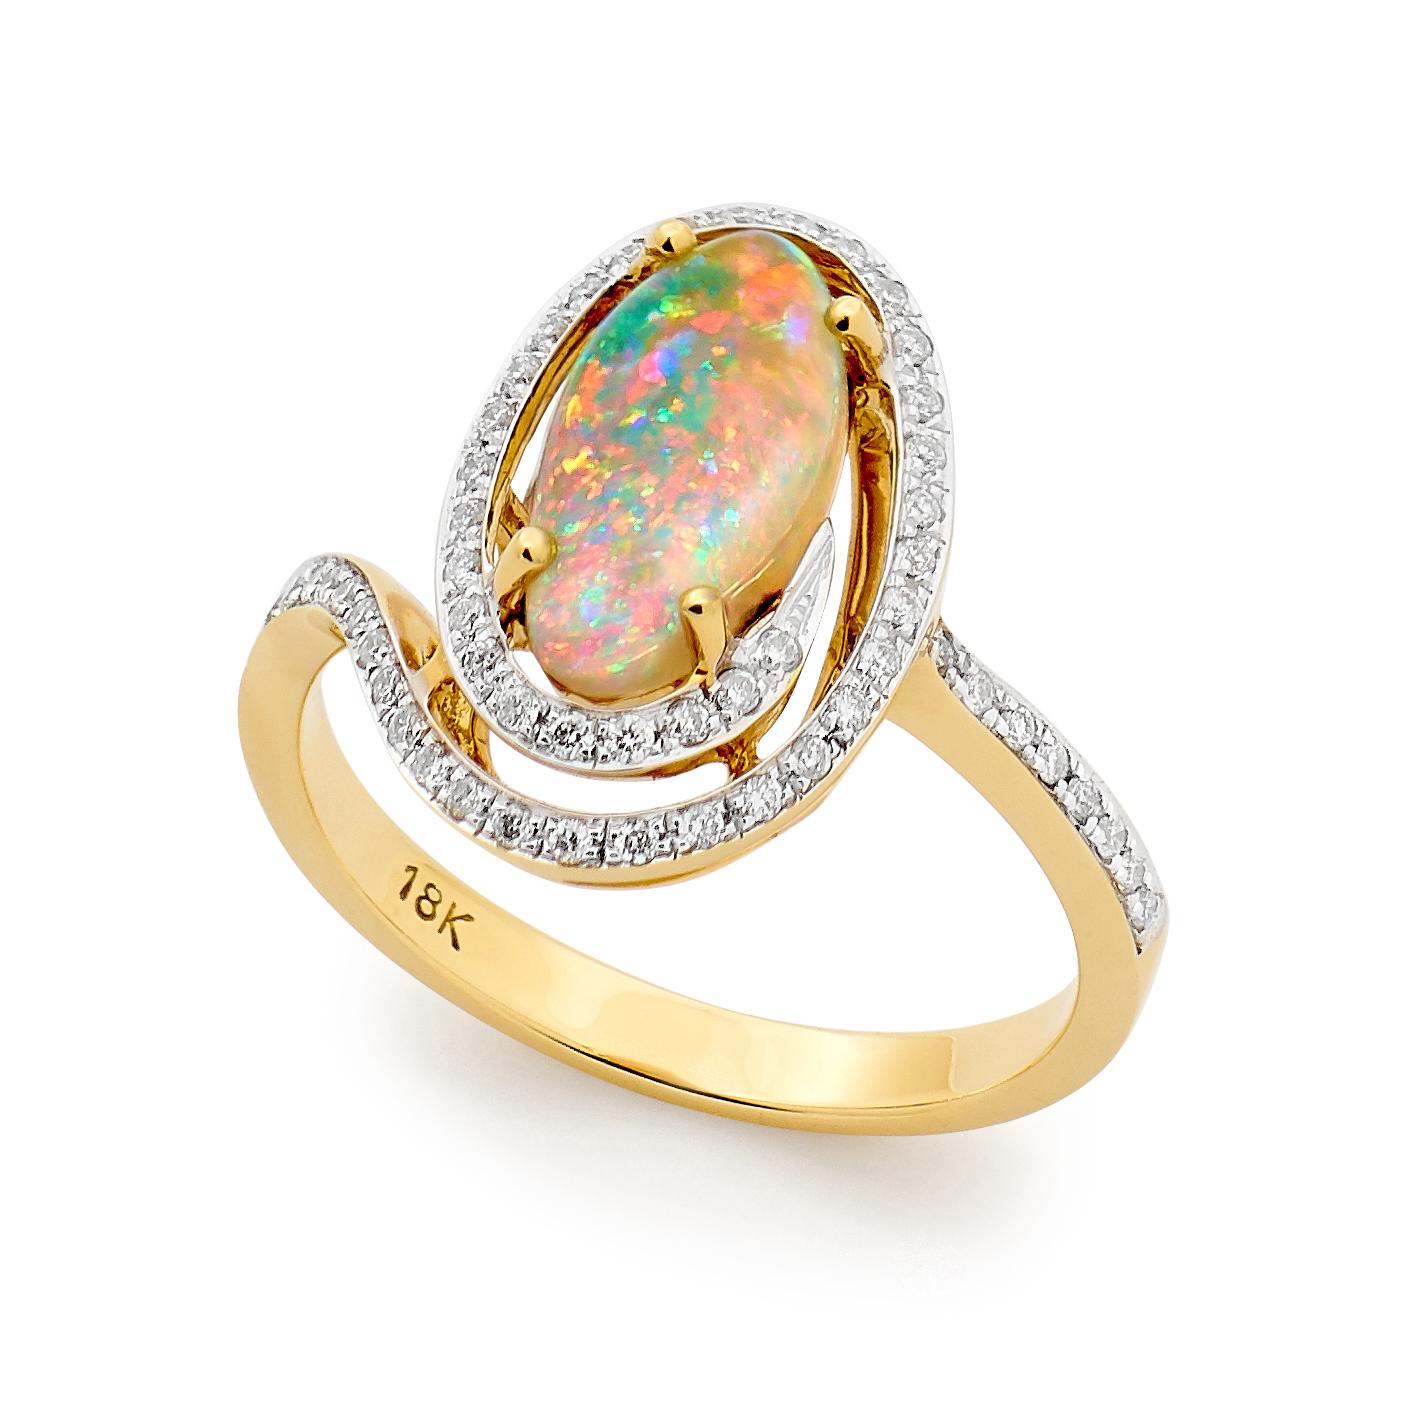 The centrepiece of our “Santa Barbara” opal ring is a 1.57 carat natural light opal from our own mines in Jundah-Opalville. Set in 18K yellow gold and circled by a sparkly swirl of 56 diamonds, this jewellery piece is reminiscent of coastal cities